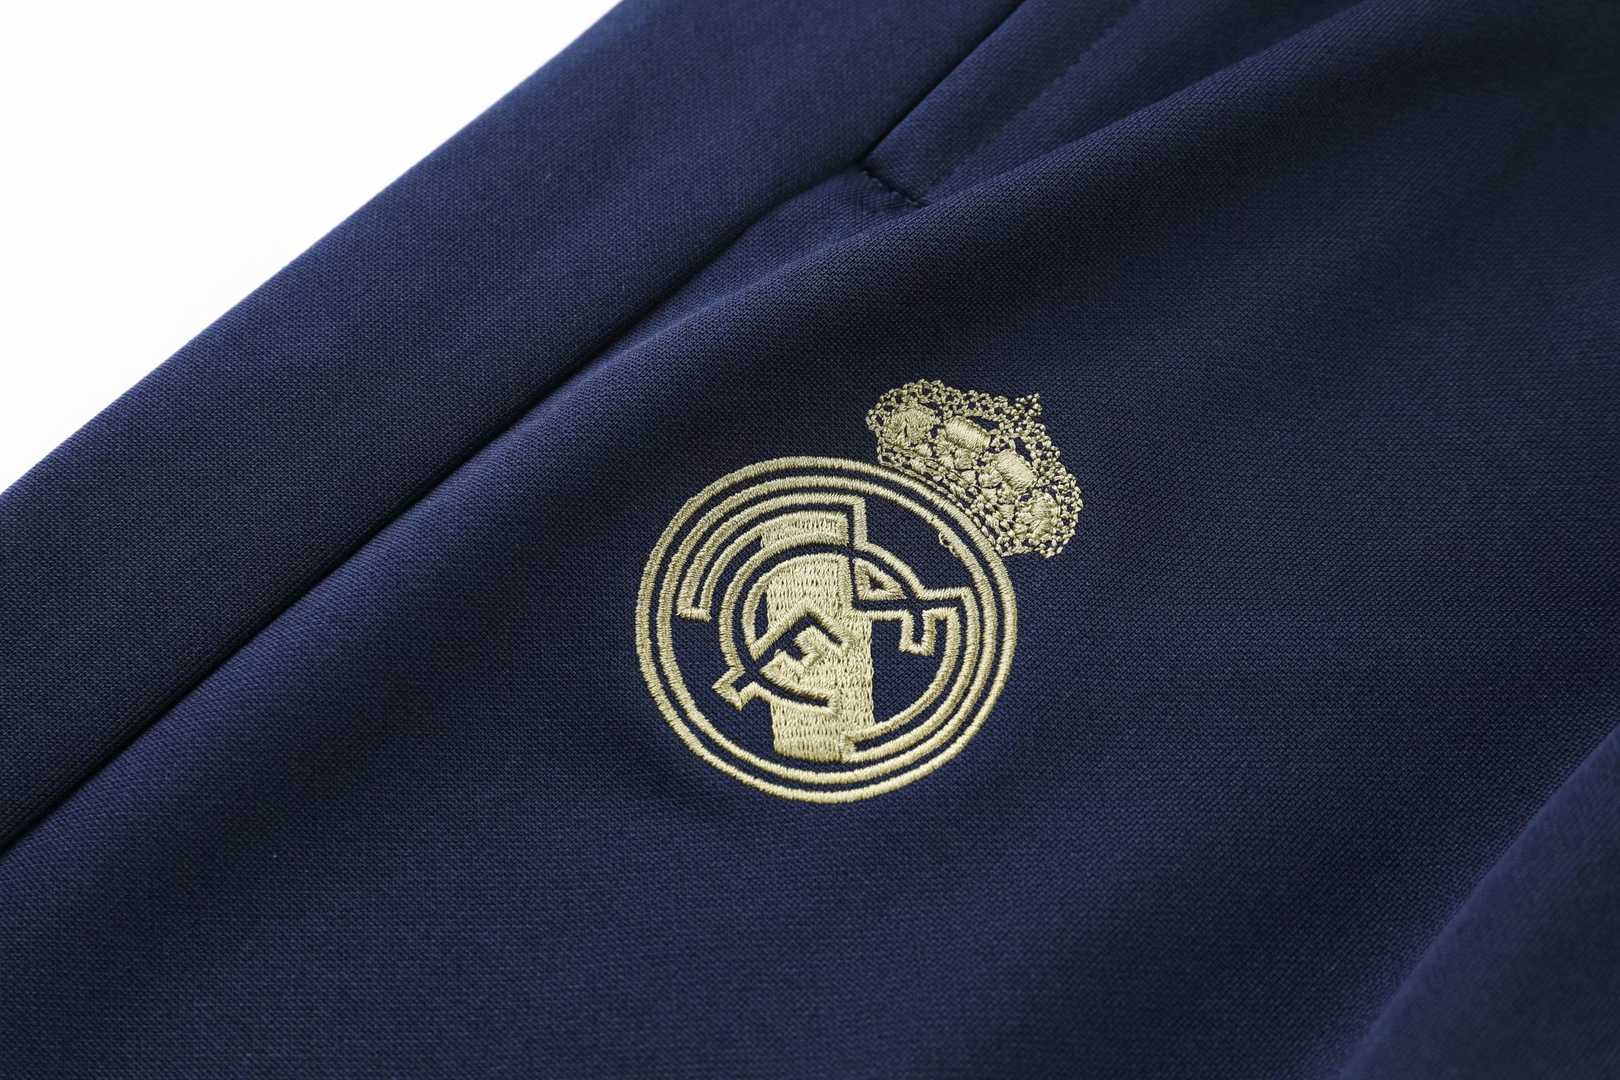 2019/20 Real Madrid Champions Navy Mens Soccer Training Suit(Jacket + Pants)